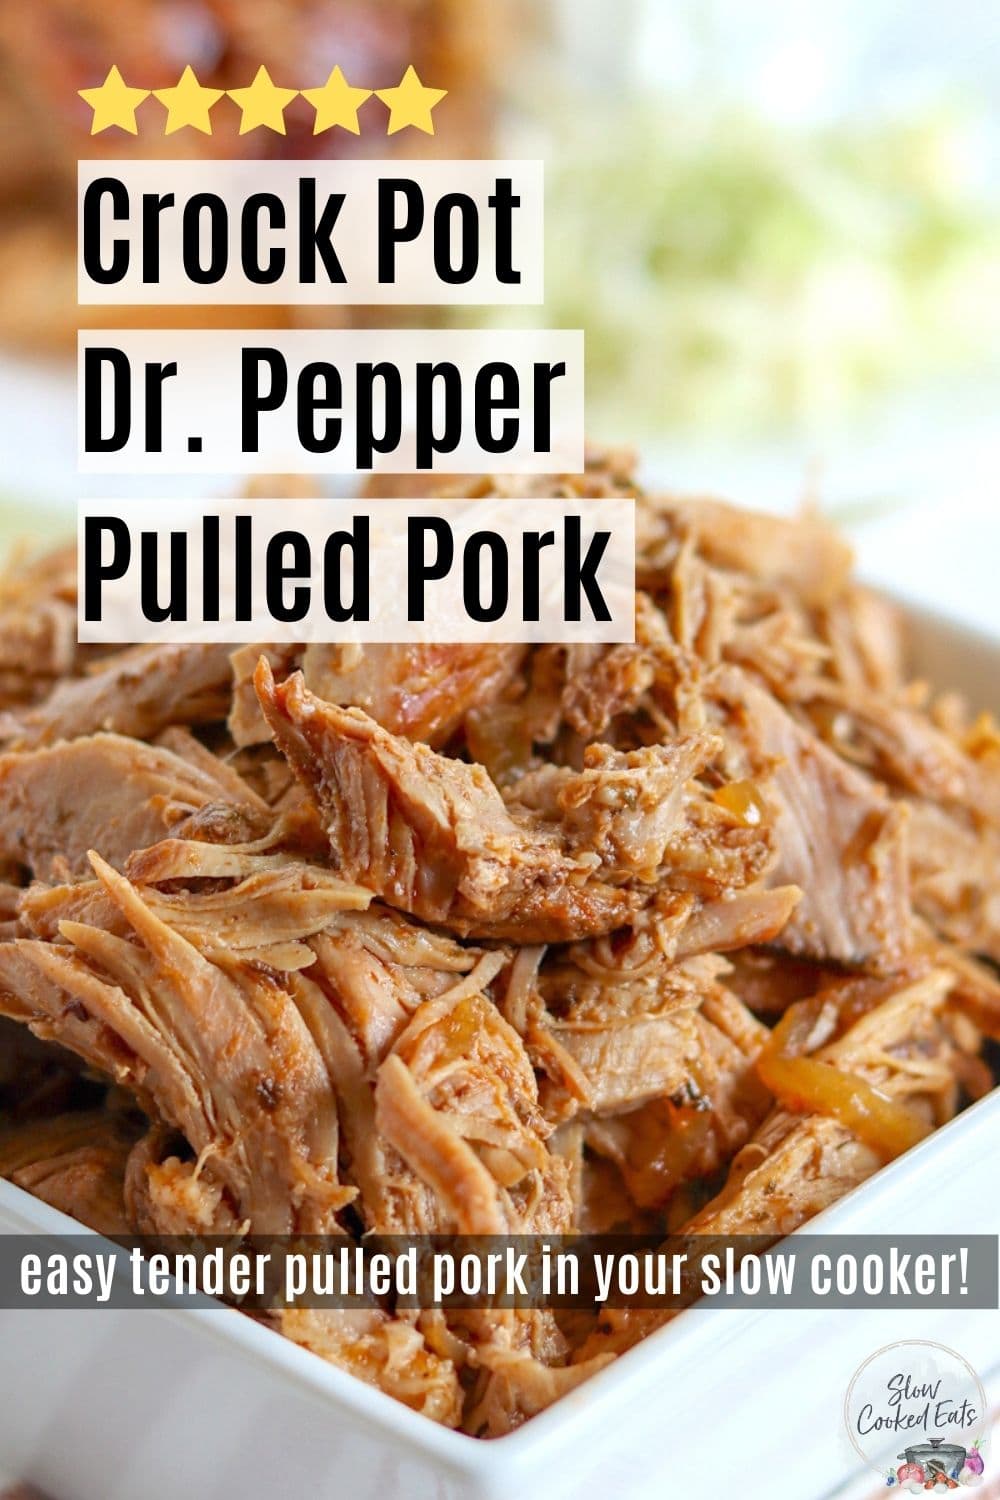 Pinterest pin with a white bowl of crock pot dr pepper rulled pork.